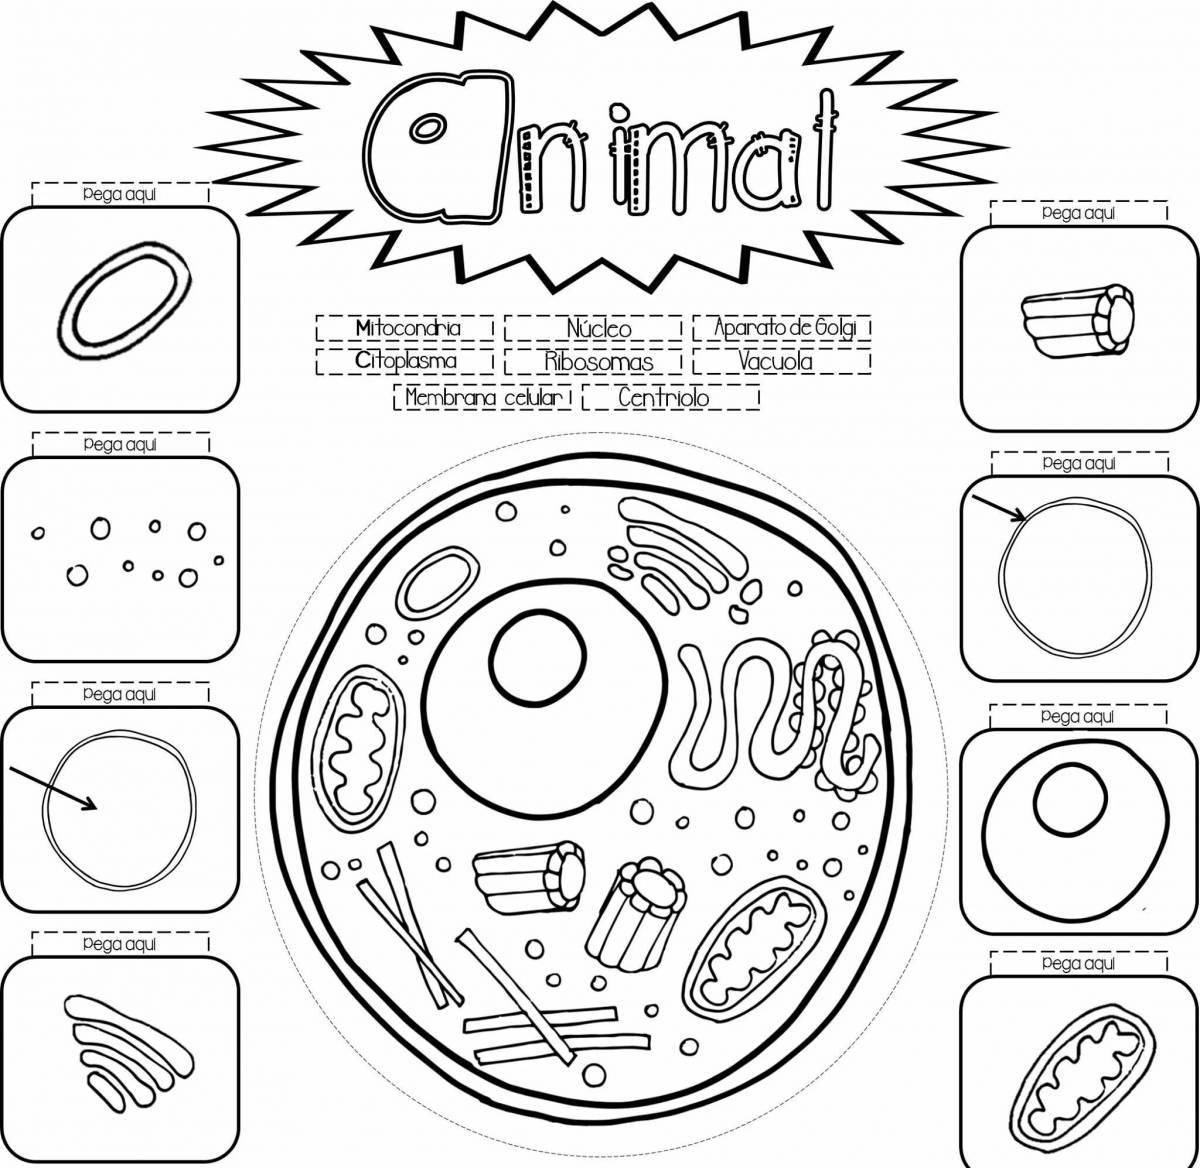 Humorous plant cell coloring page